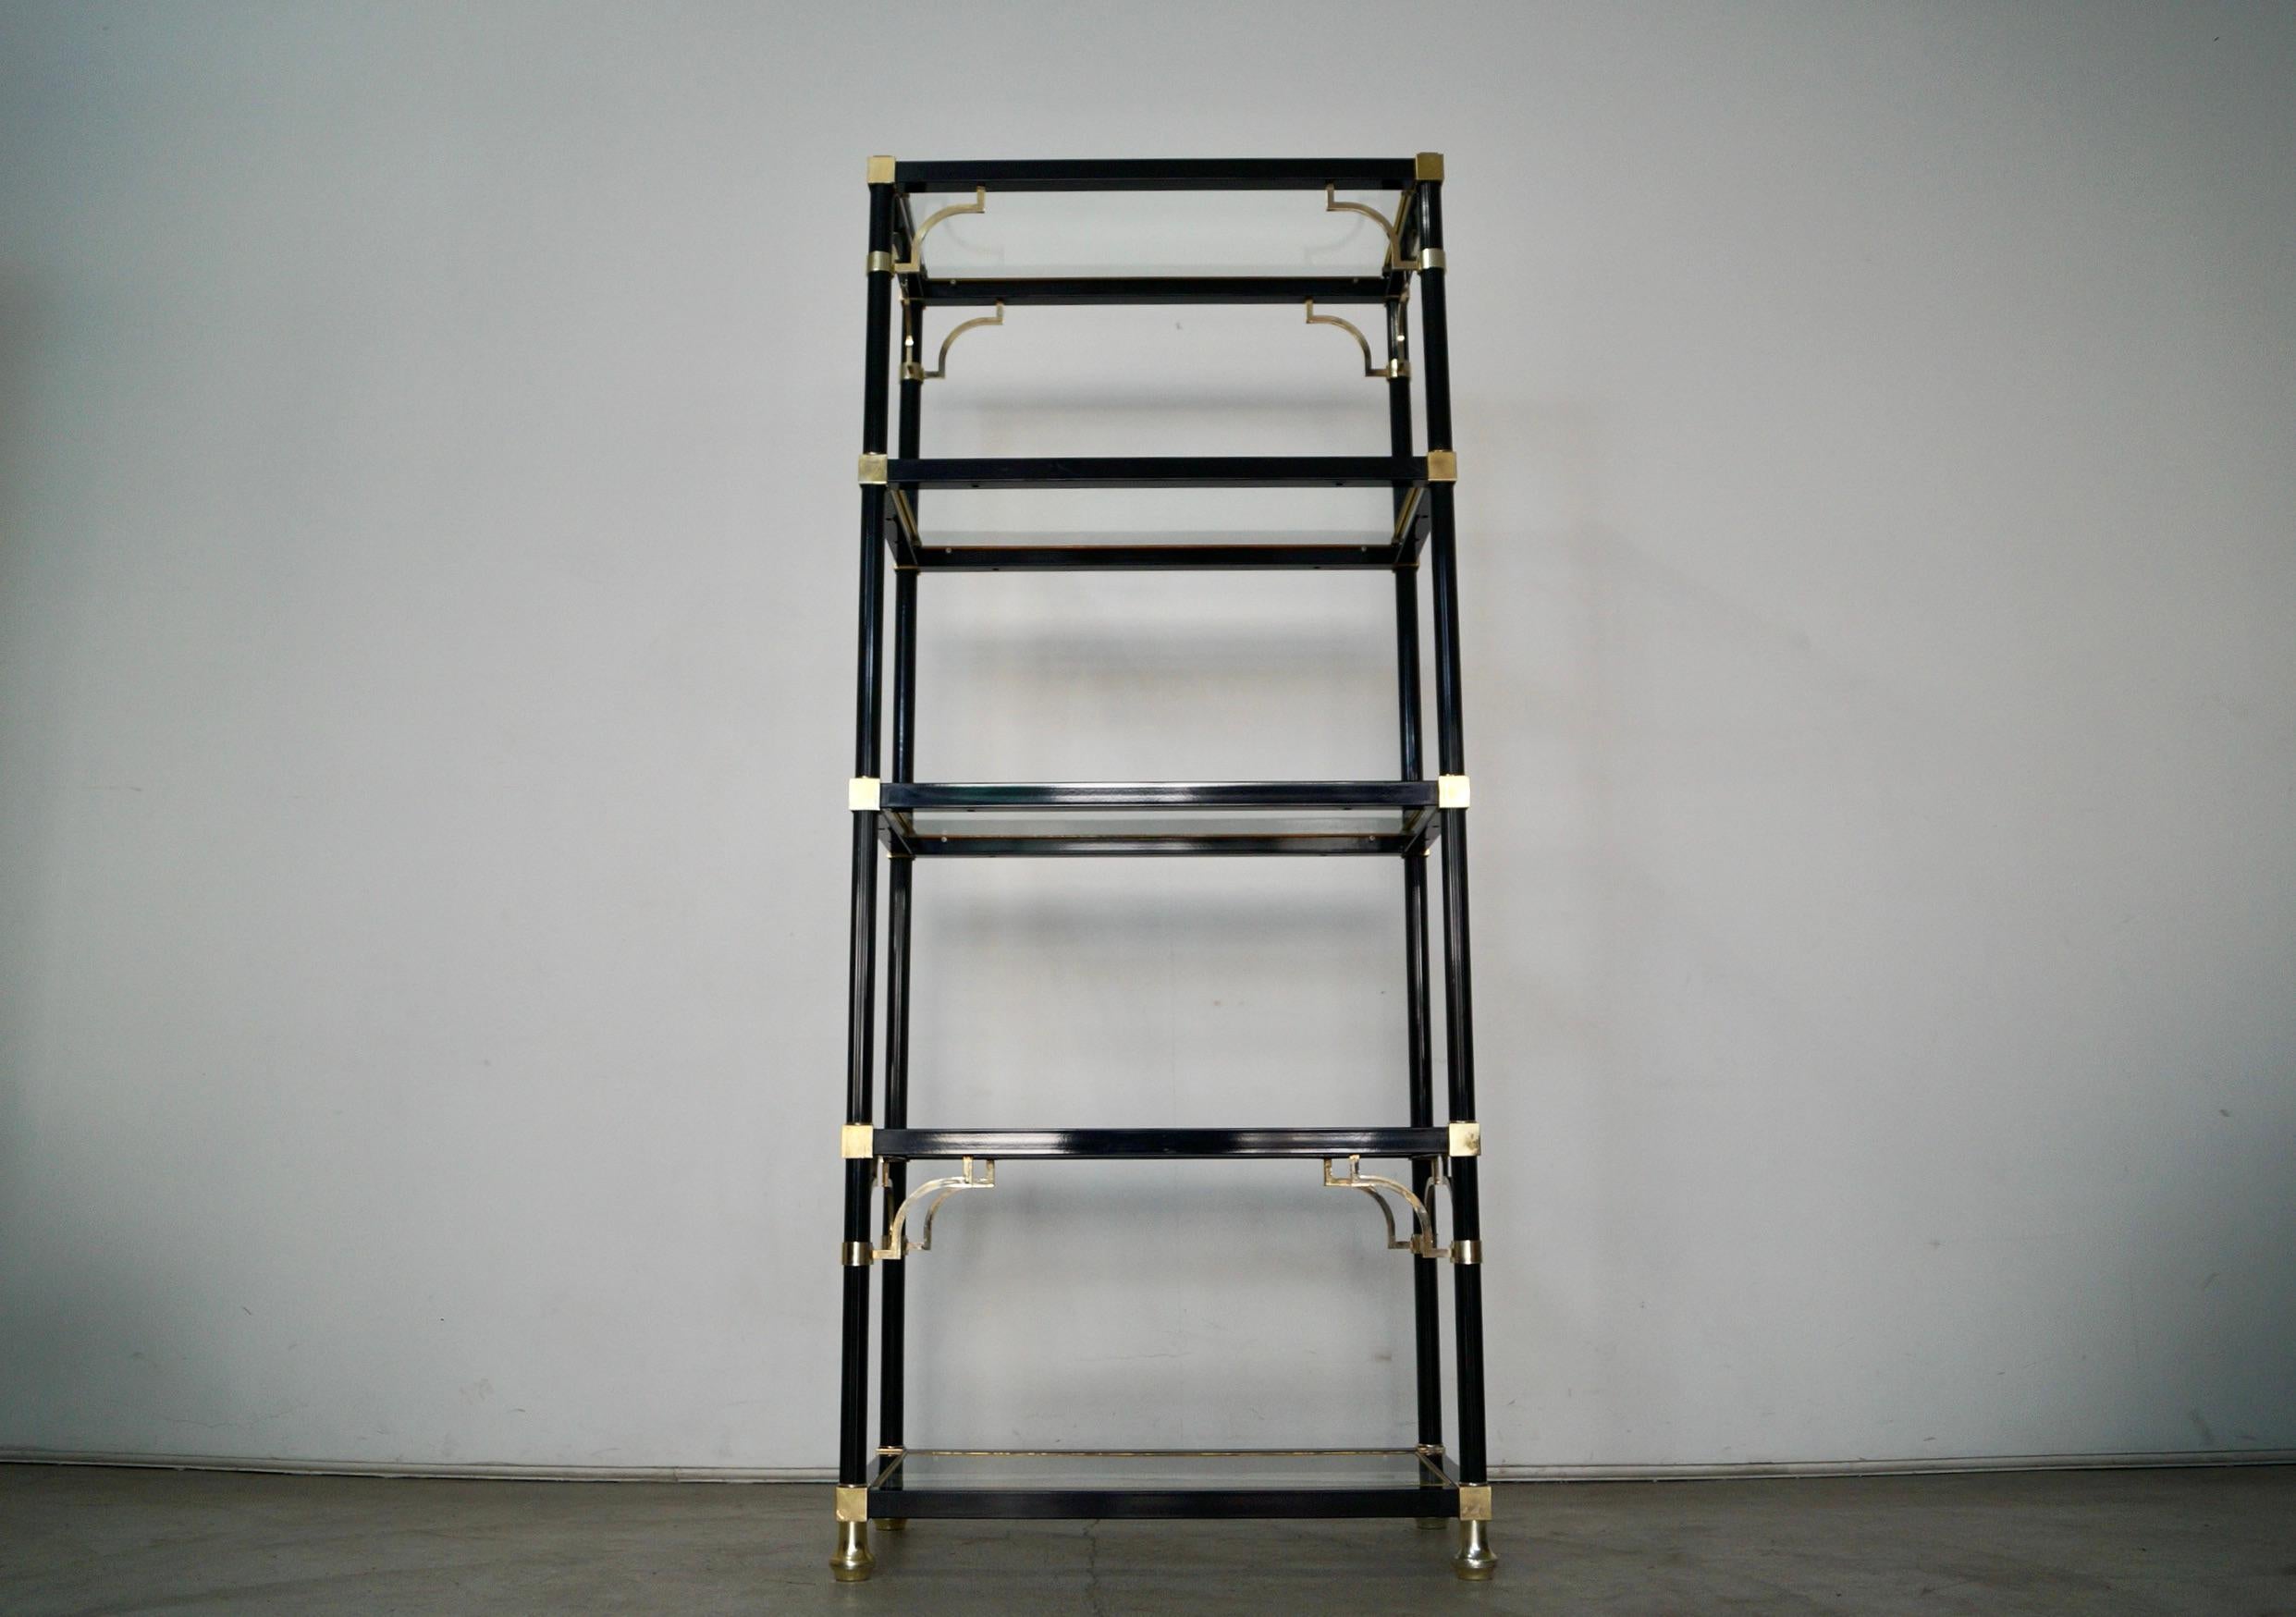 Gorgeous vintage Mid century Modern shelving unit for sale. Manufactured in the 1970's, and very well made. It's made of aluminum and metal, and has brass accents and details. It has five glass shelves that go inserted into the metal frame, and the